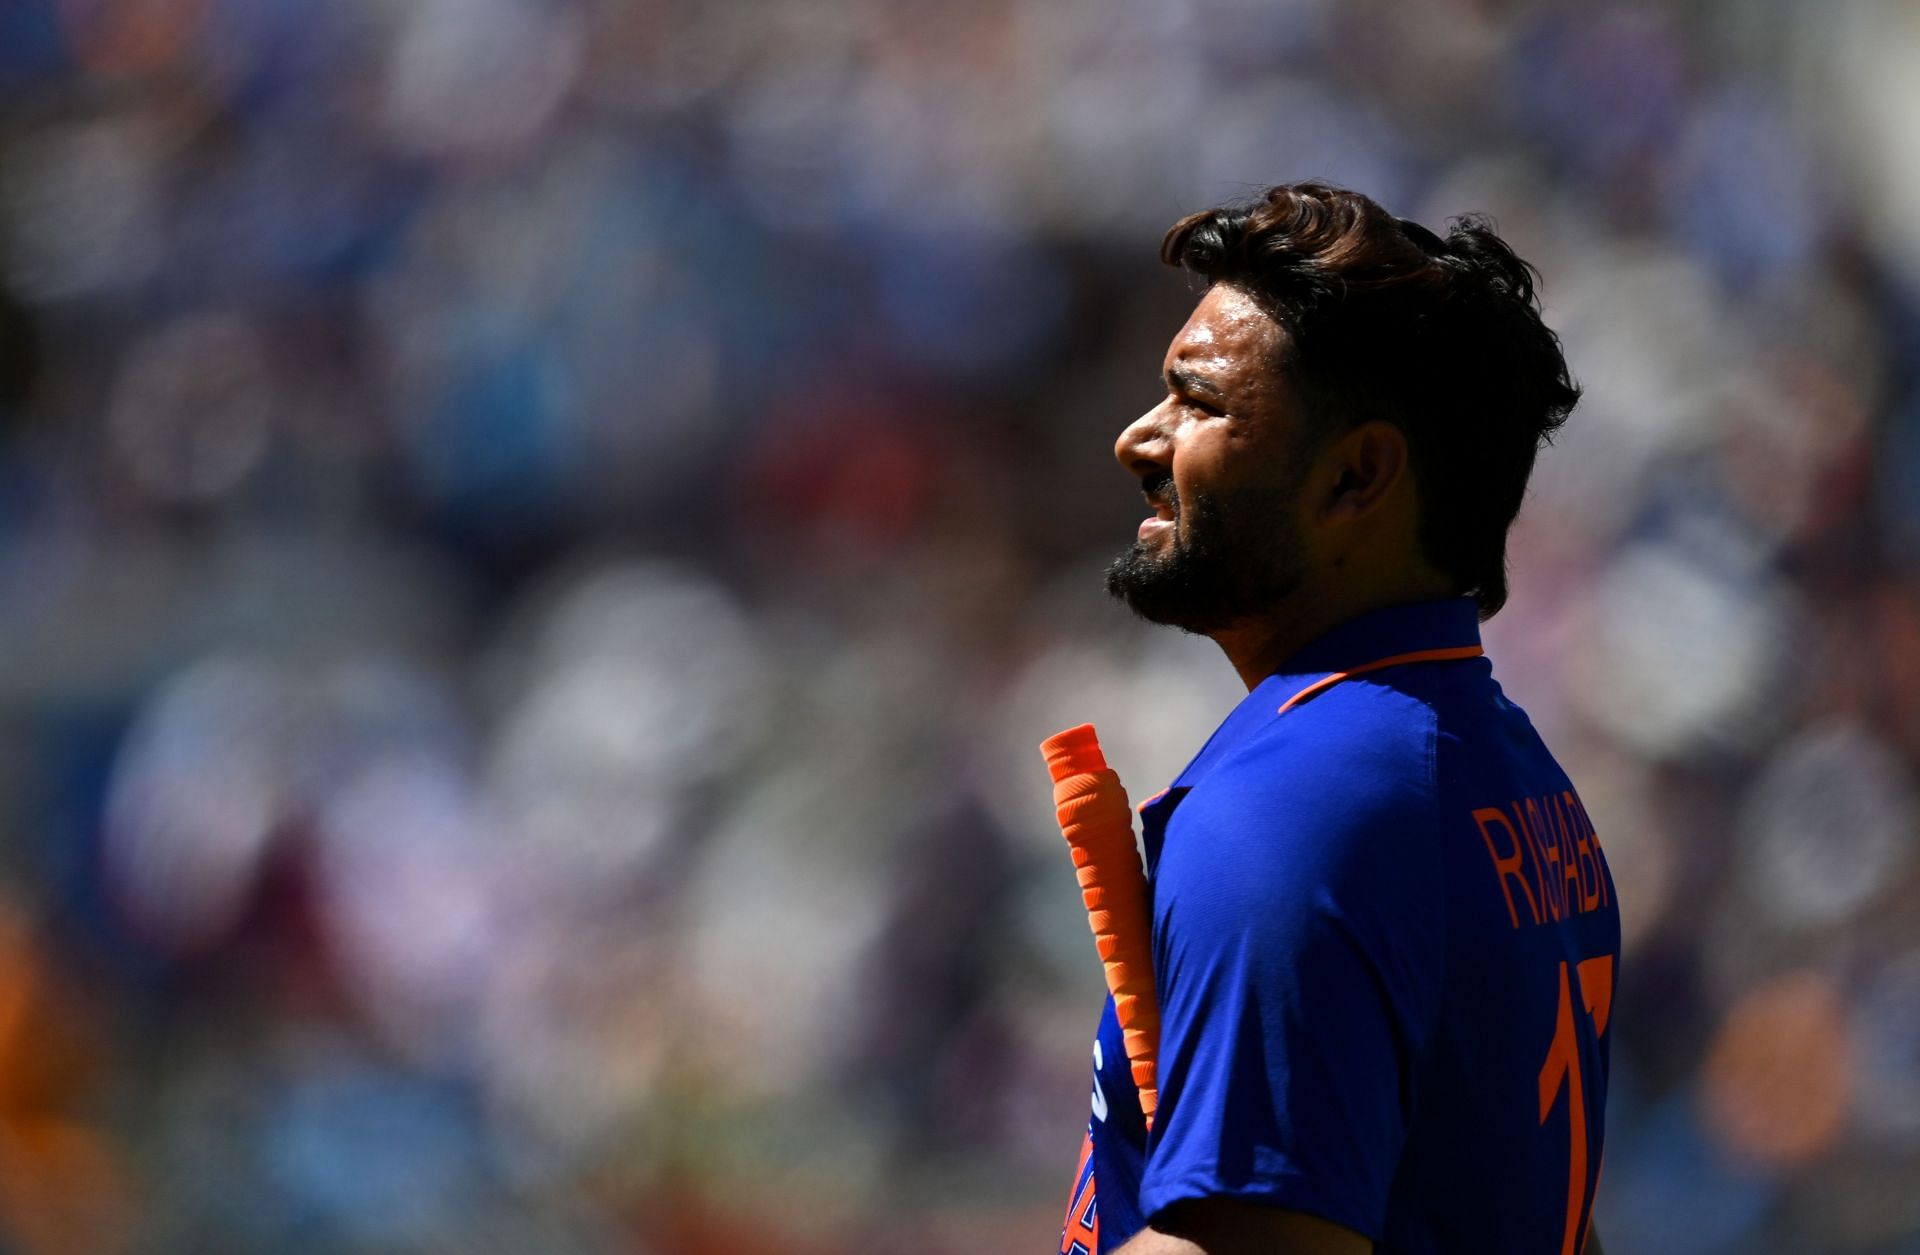 Rishabh Pant was dismissed for 24 against West Indies on Monday.